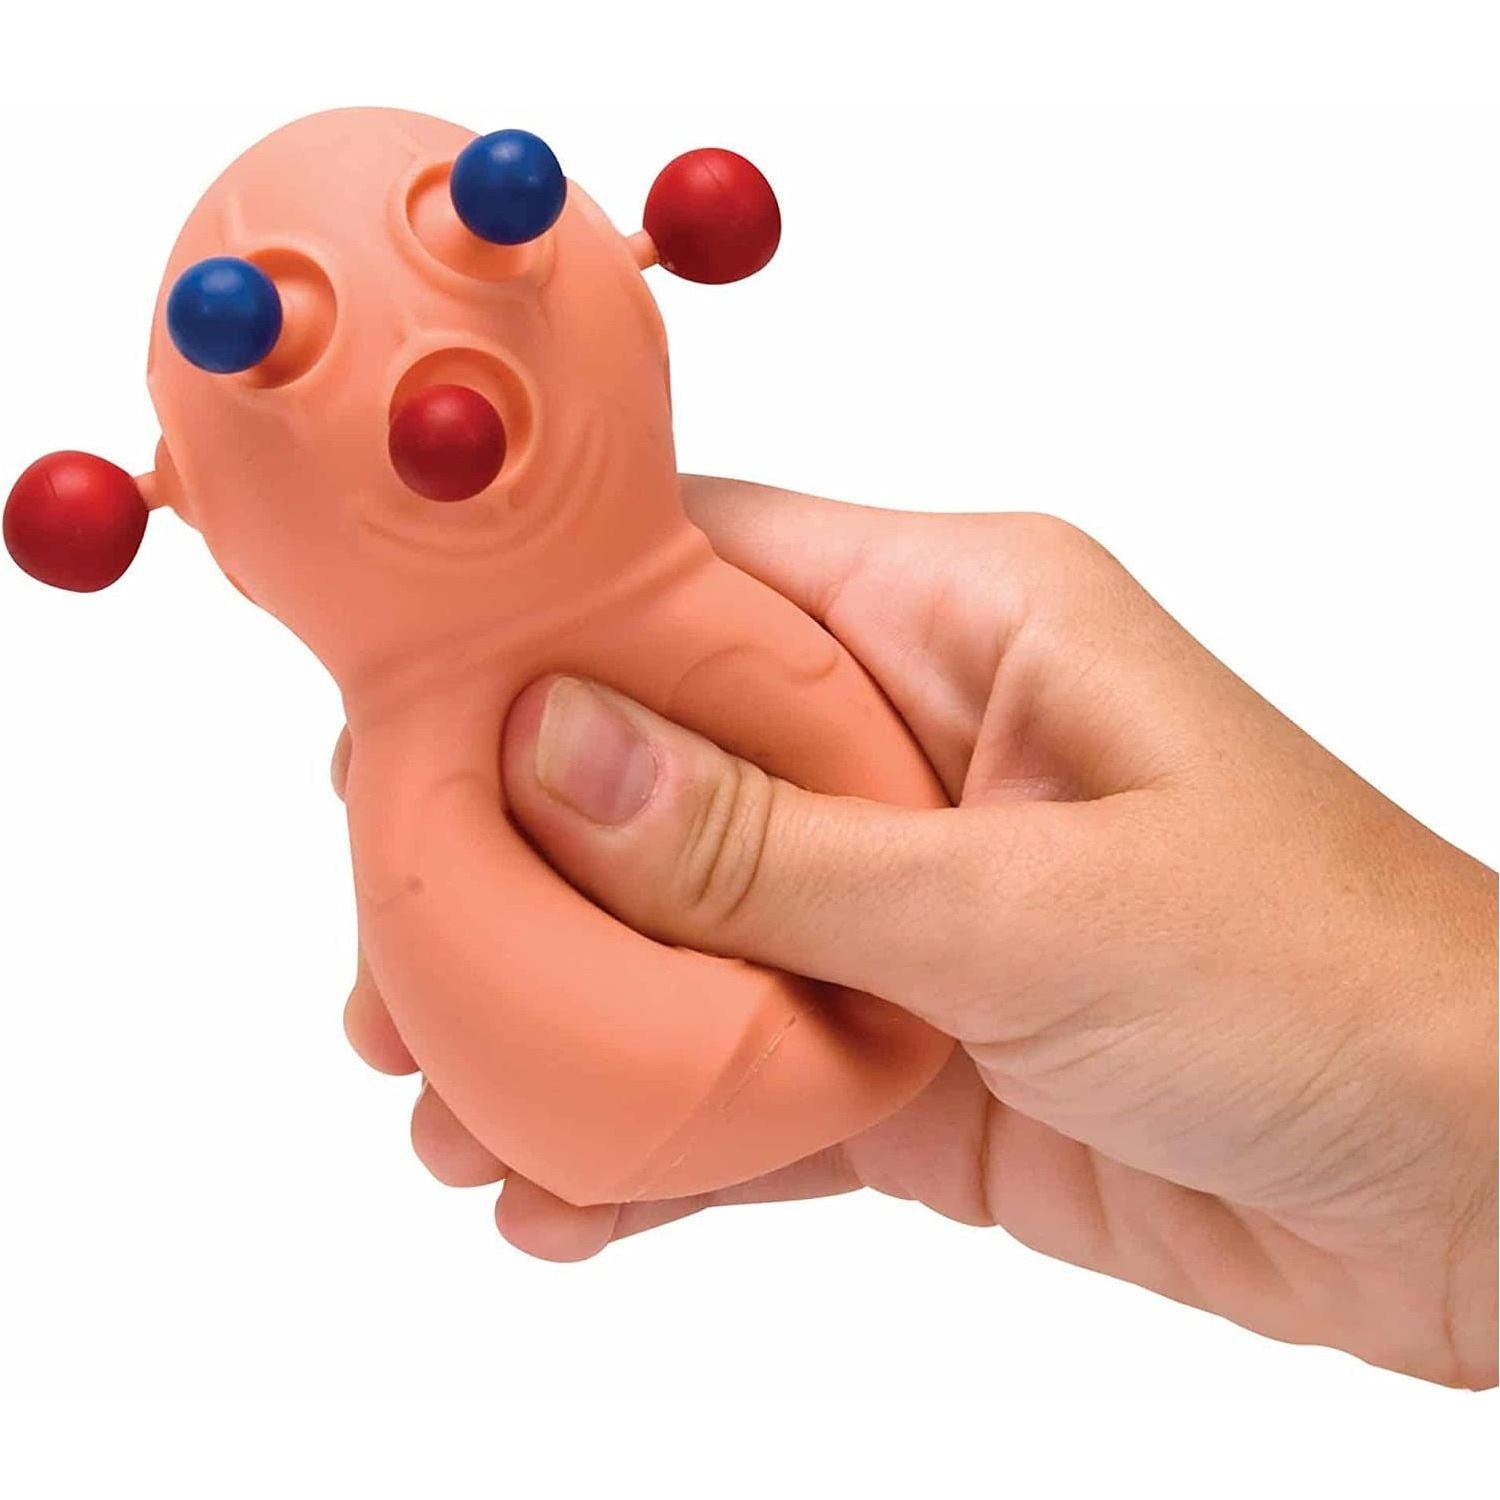 PANIC PETE SQUEEZE TOY